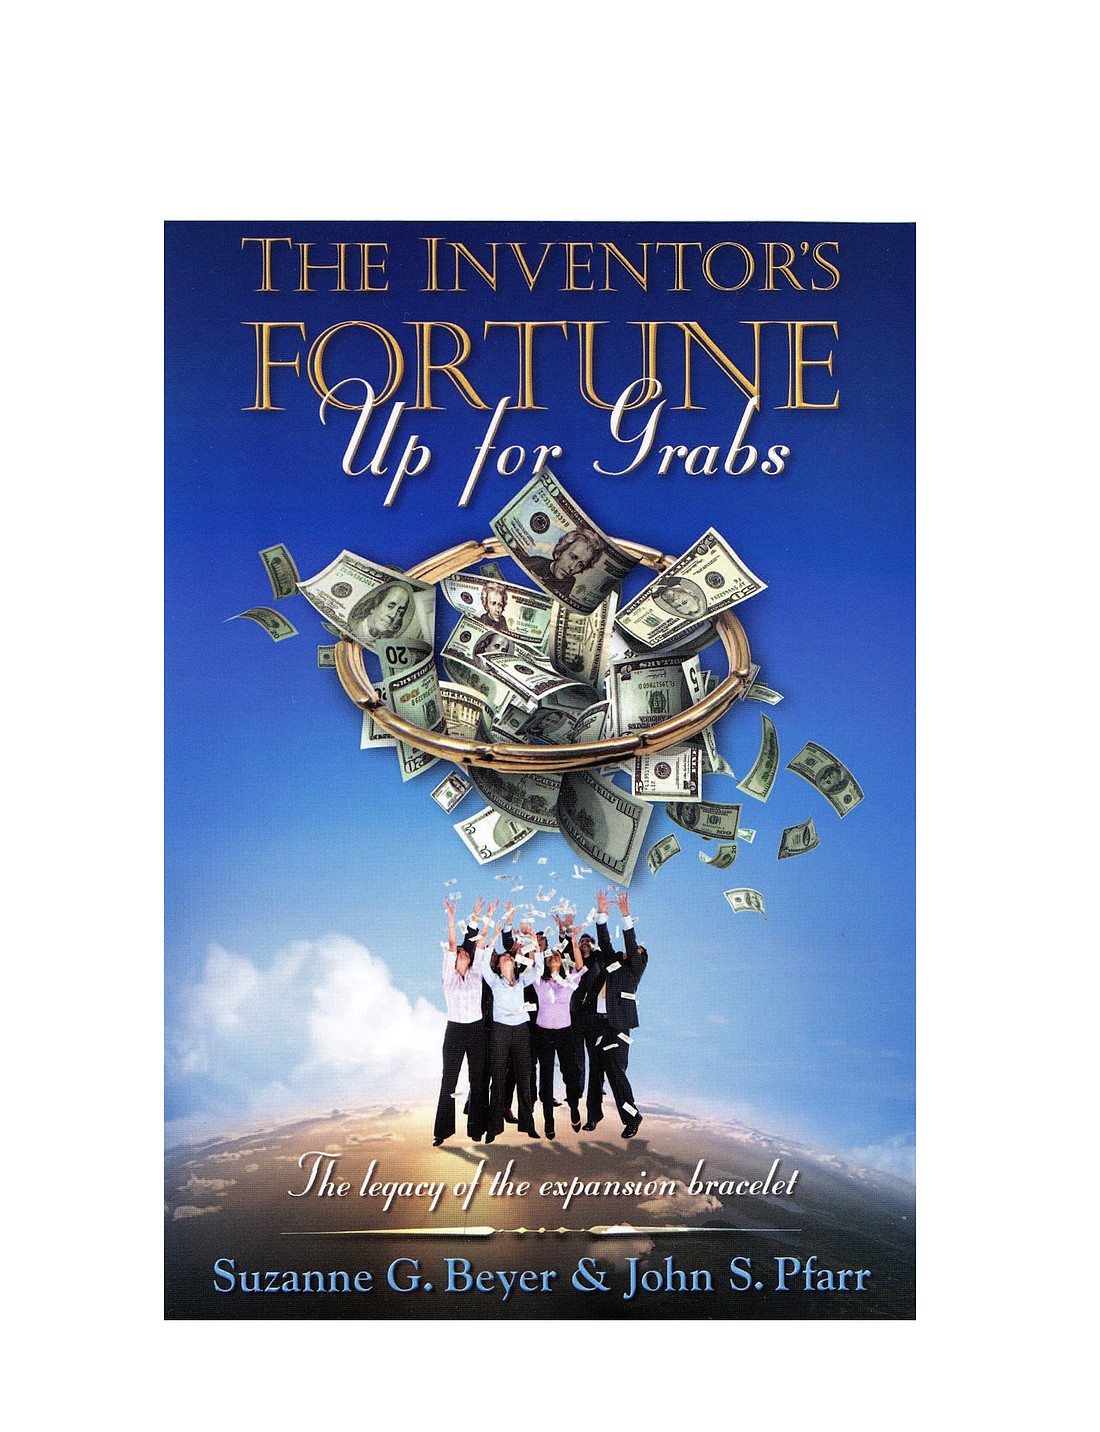 Suzanne G. Beyer co-authored the book, “The Inventor’s Fortune Up For Grabs” by Suzanne G. Beyer and John S. Pfarr. www.theinventorsfortune.com